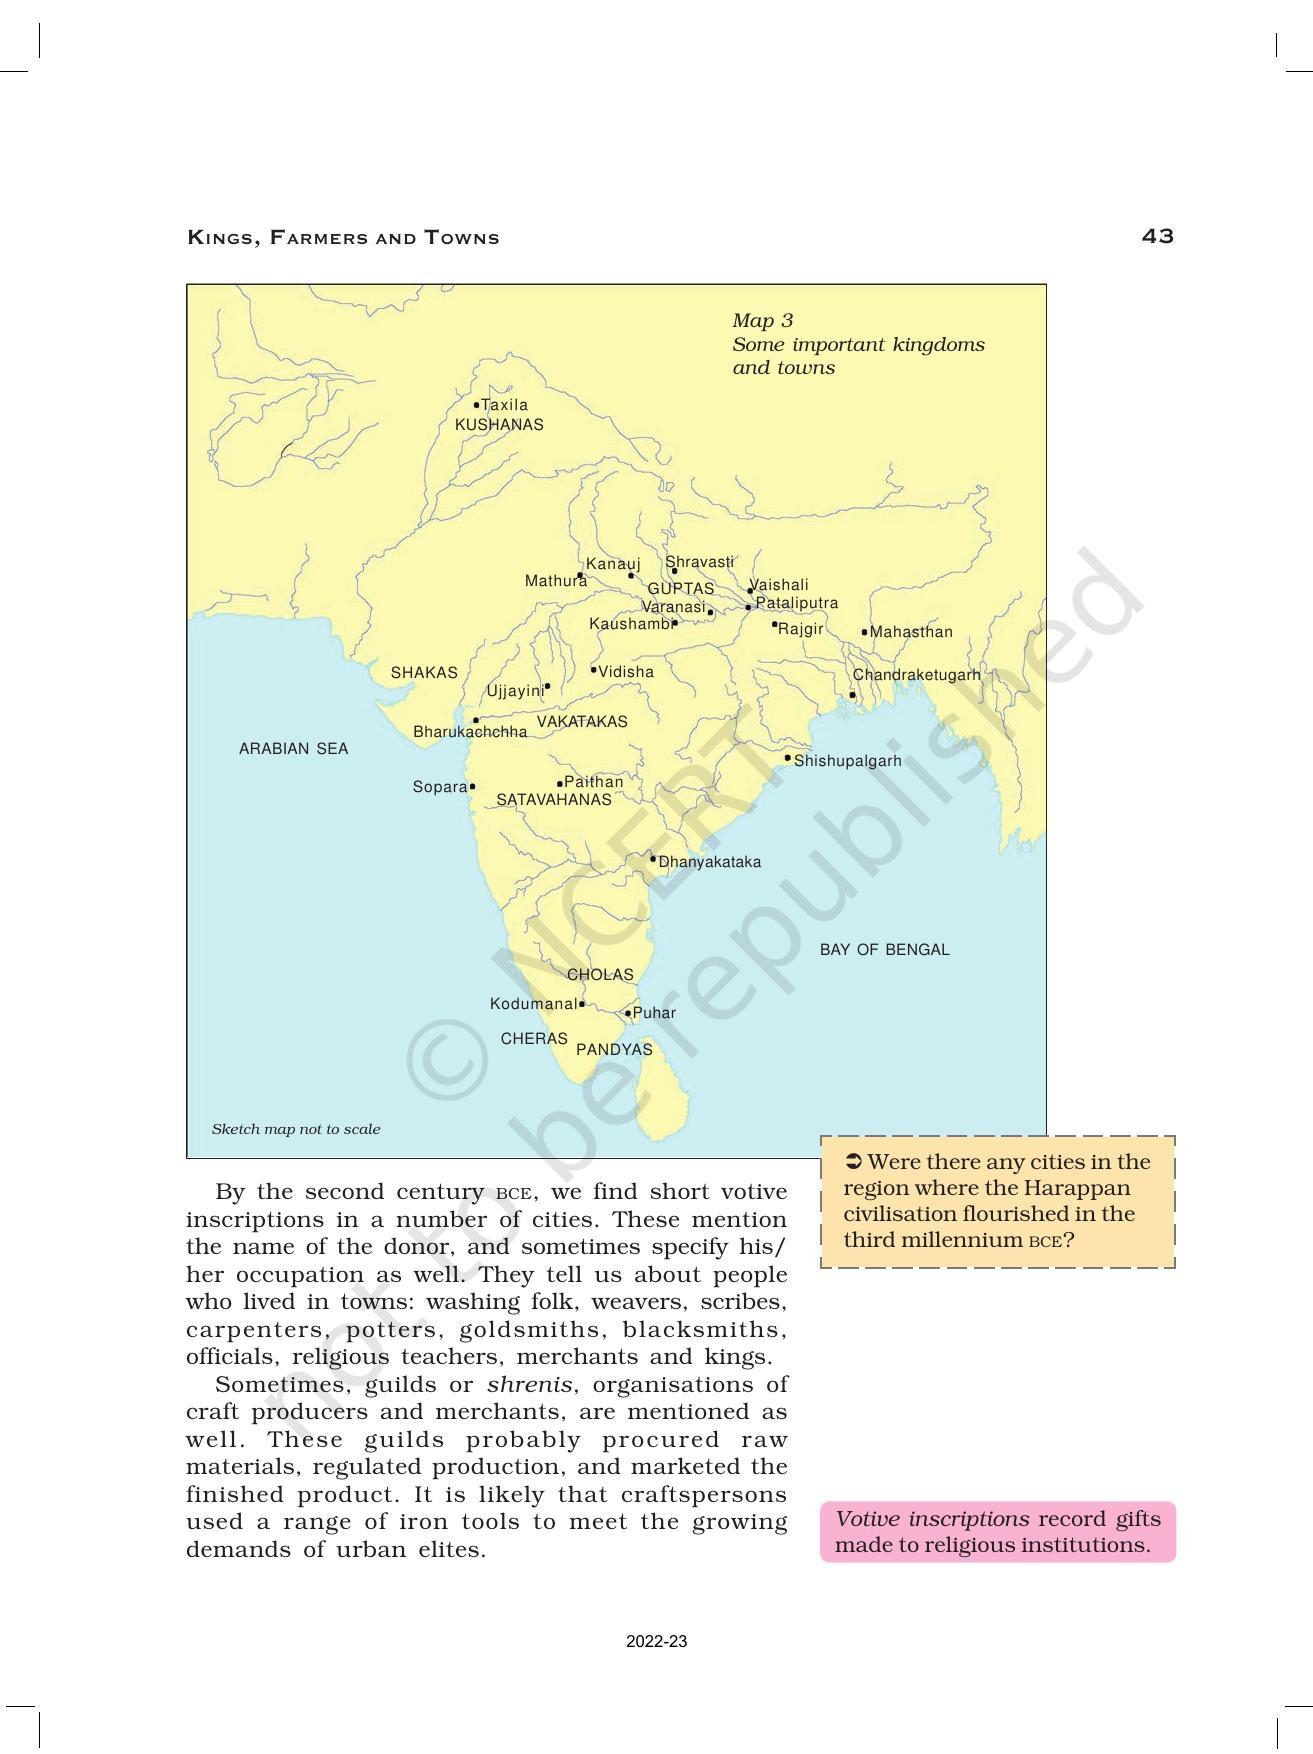 NCERT Book for Class 12 History (Part-1) Chapter 2 Kings, Farmers, and Towns - Page 16